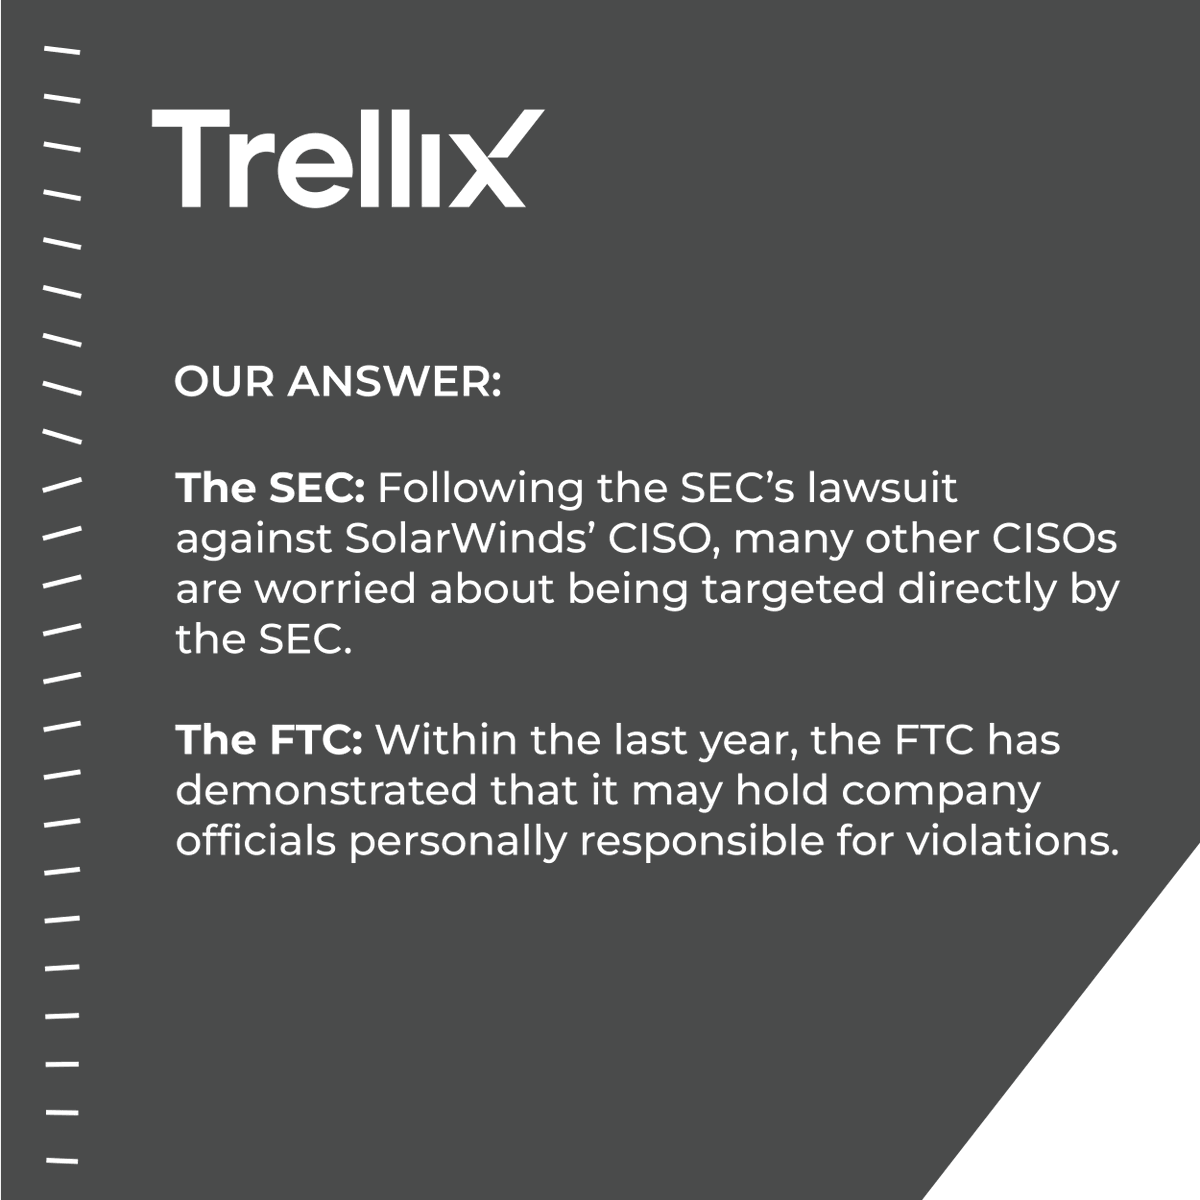 Regulatory agencies can hold officials personally responsible for violations in the aftermath of a cyberattack — understand how you and your org may be impacted. Check out Trellix risk and compliance services to learn more. bit.ly/3vIcBAG